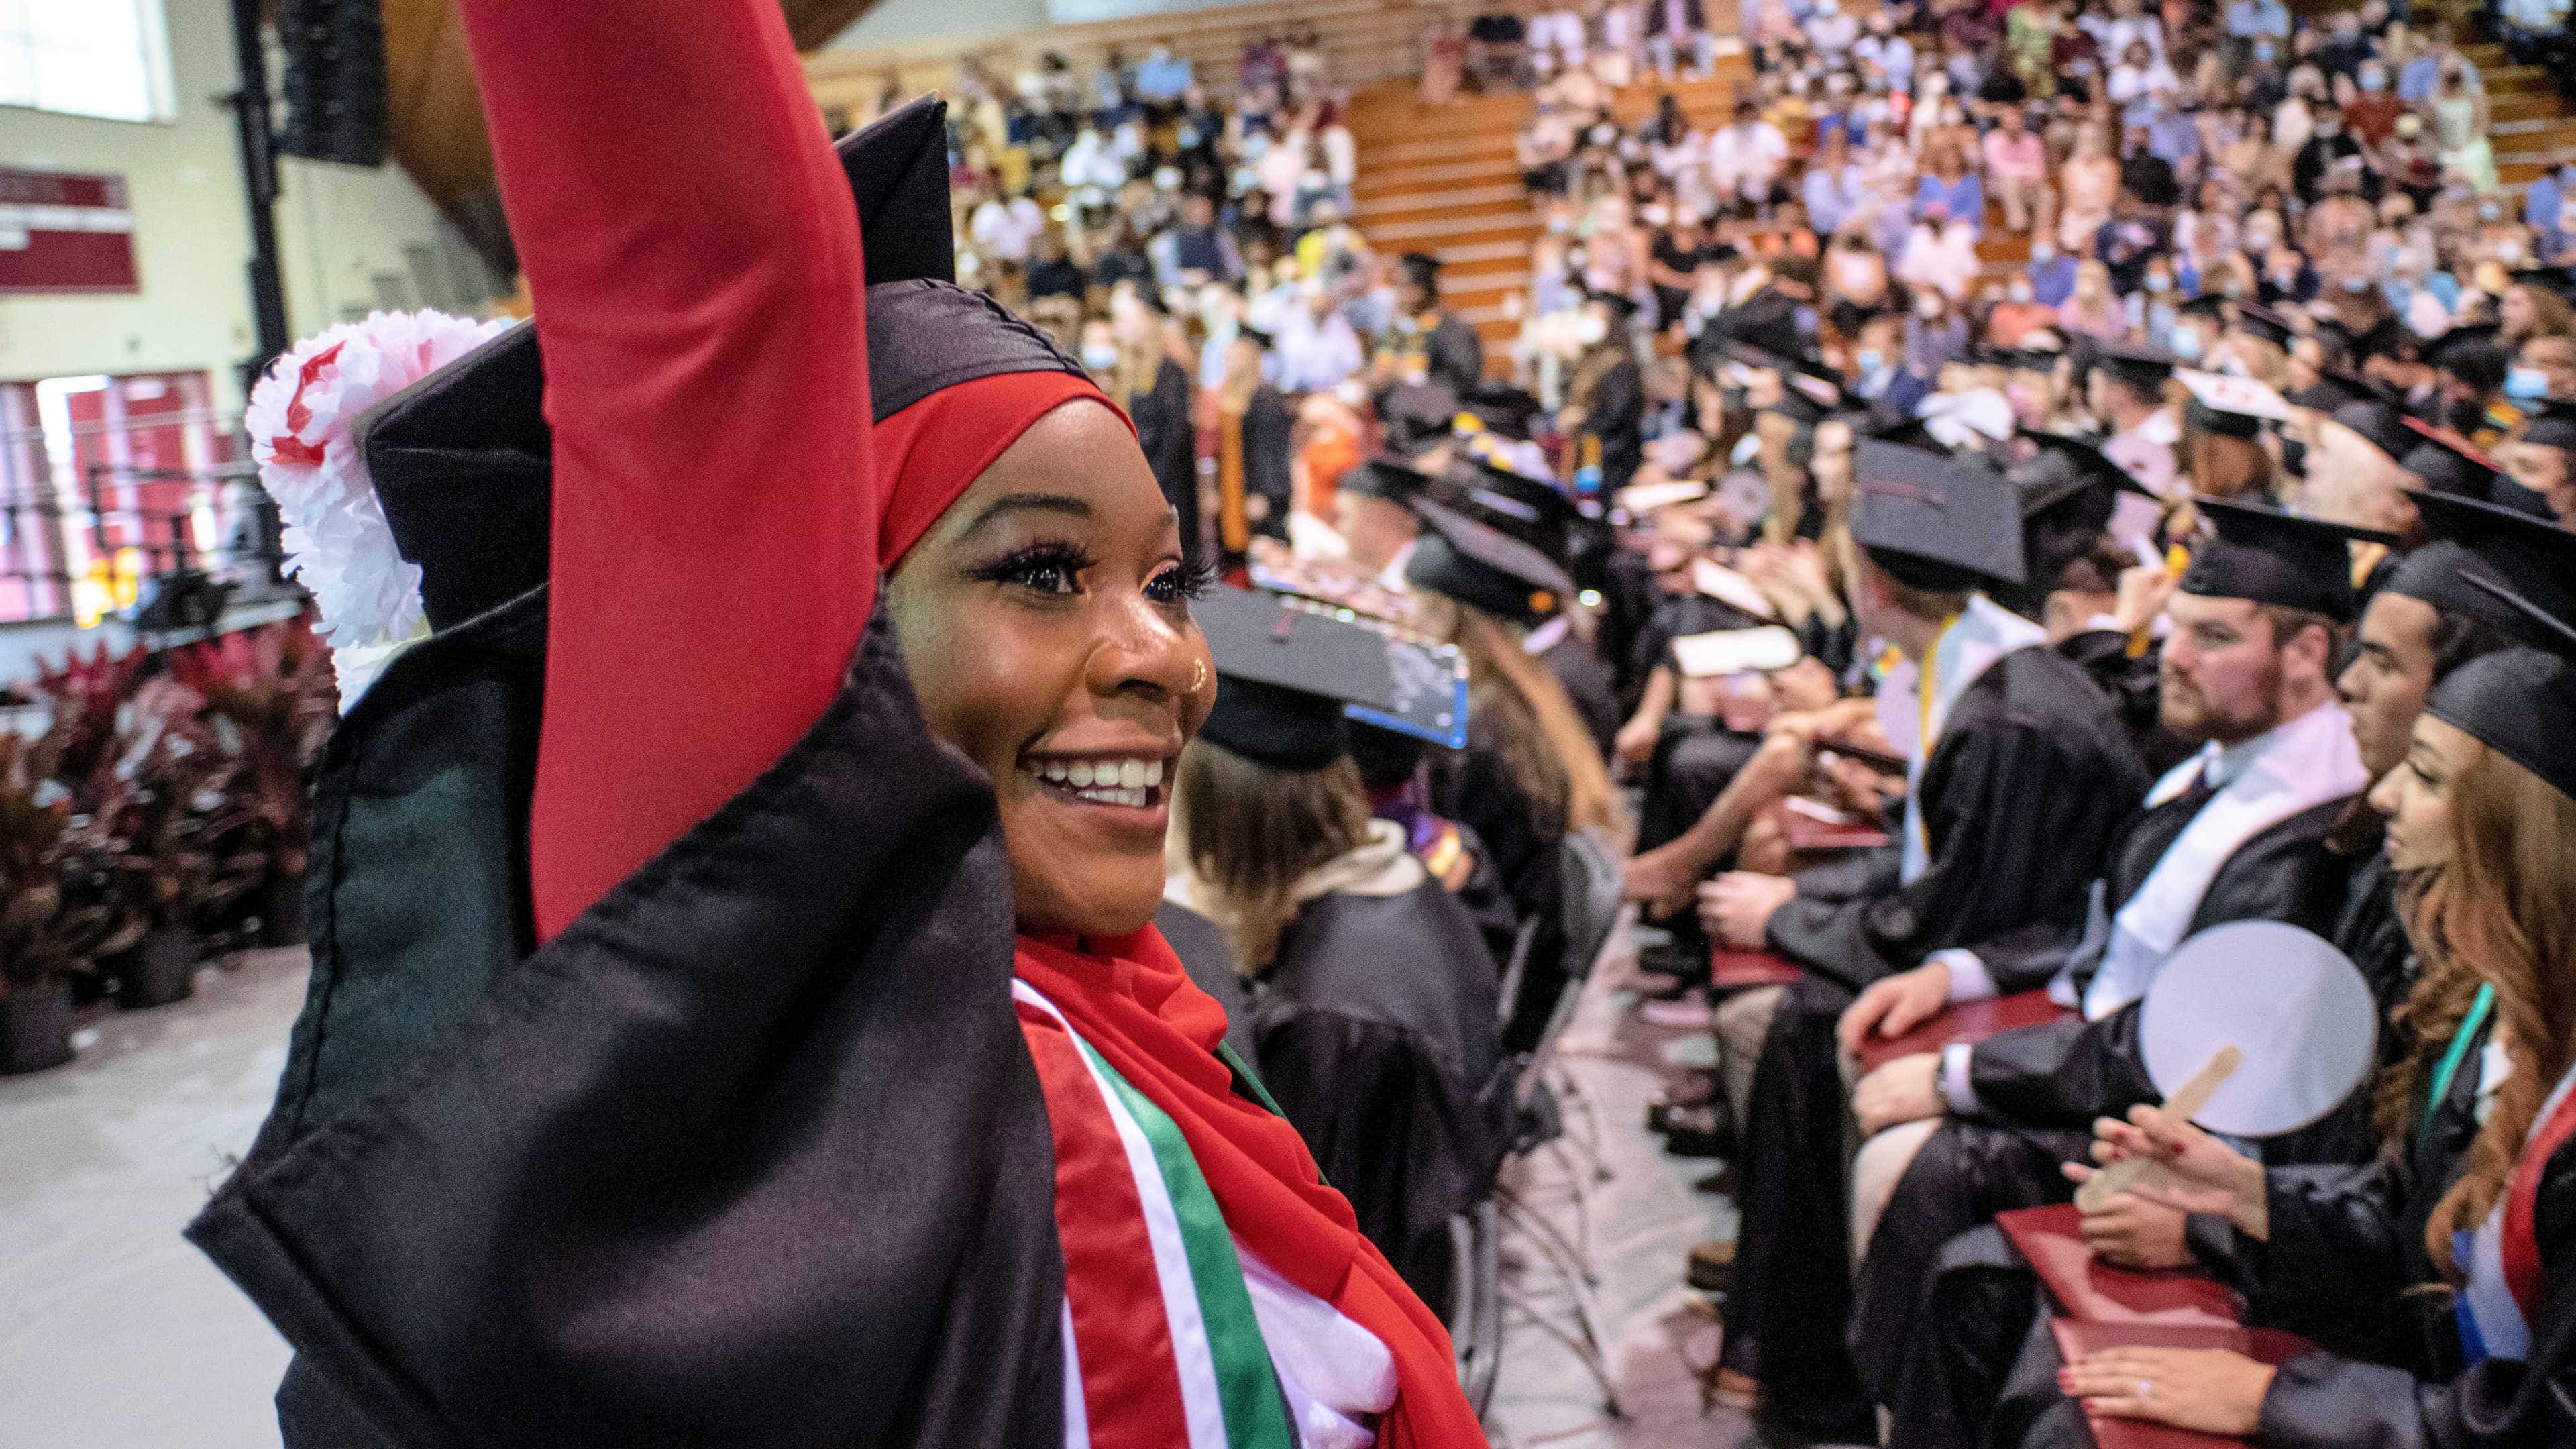 A student waves to the crowd after receiving their diploma.